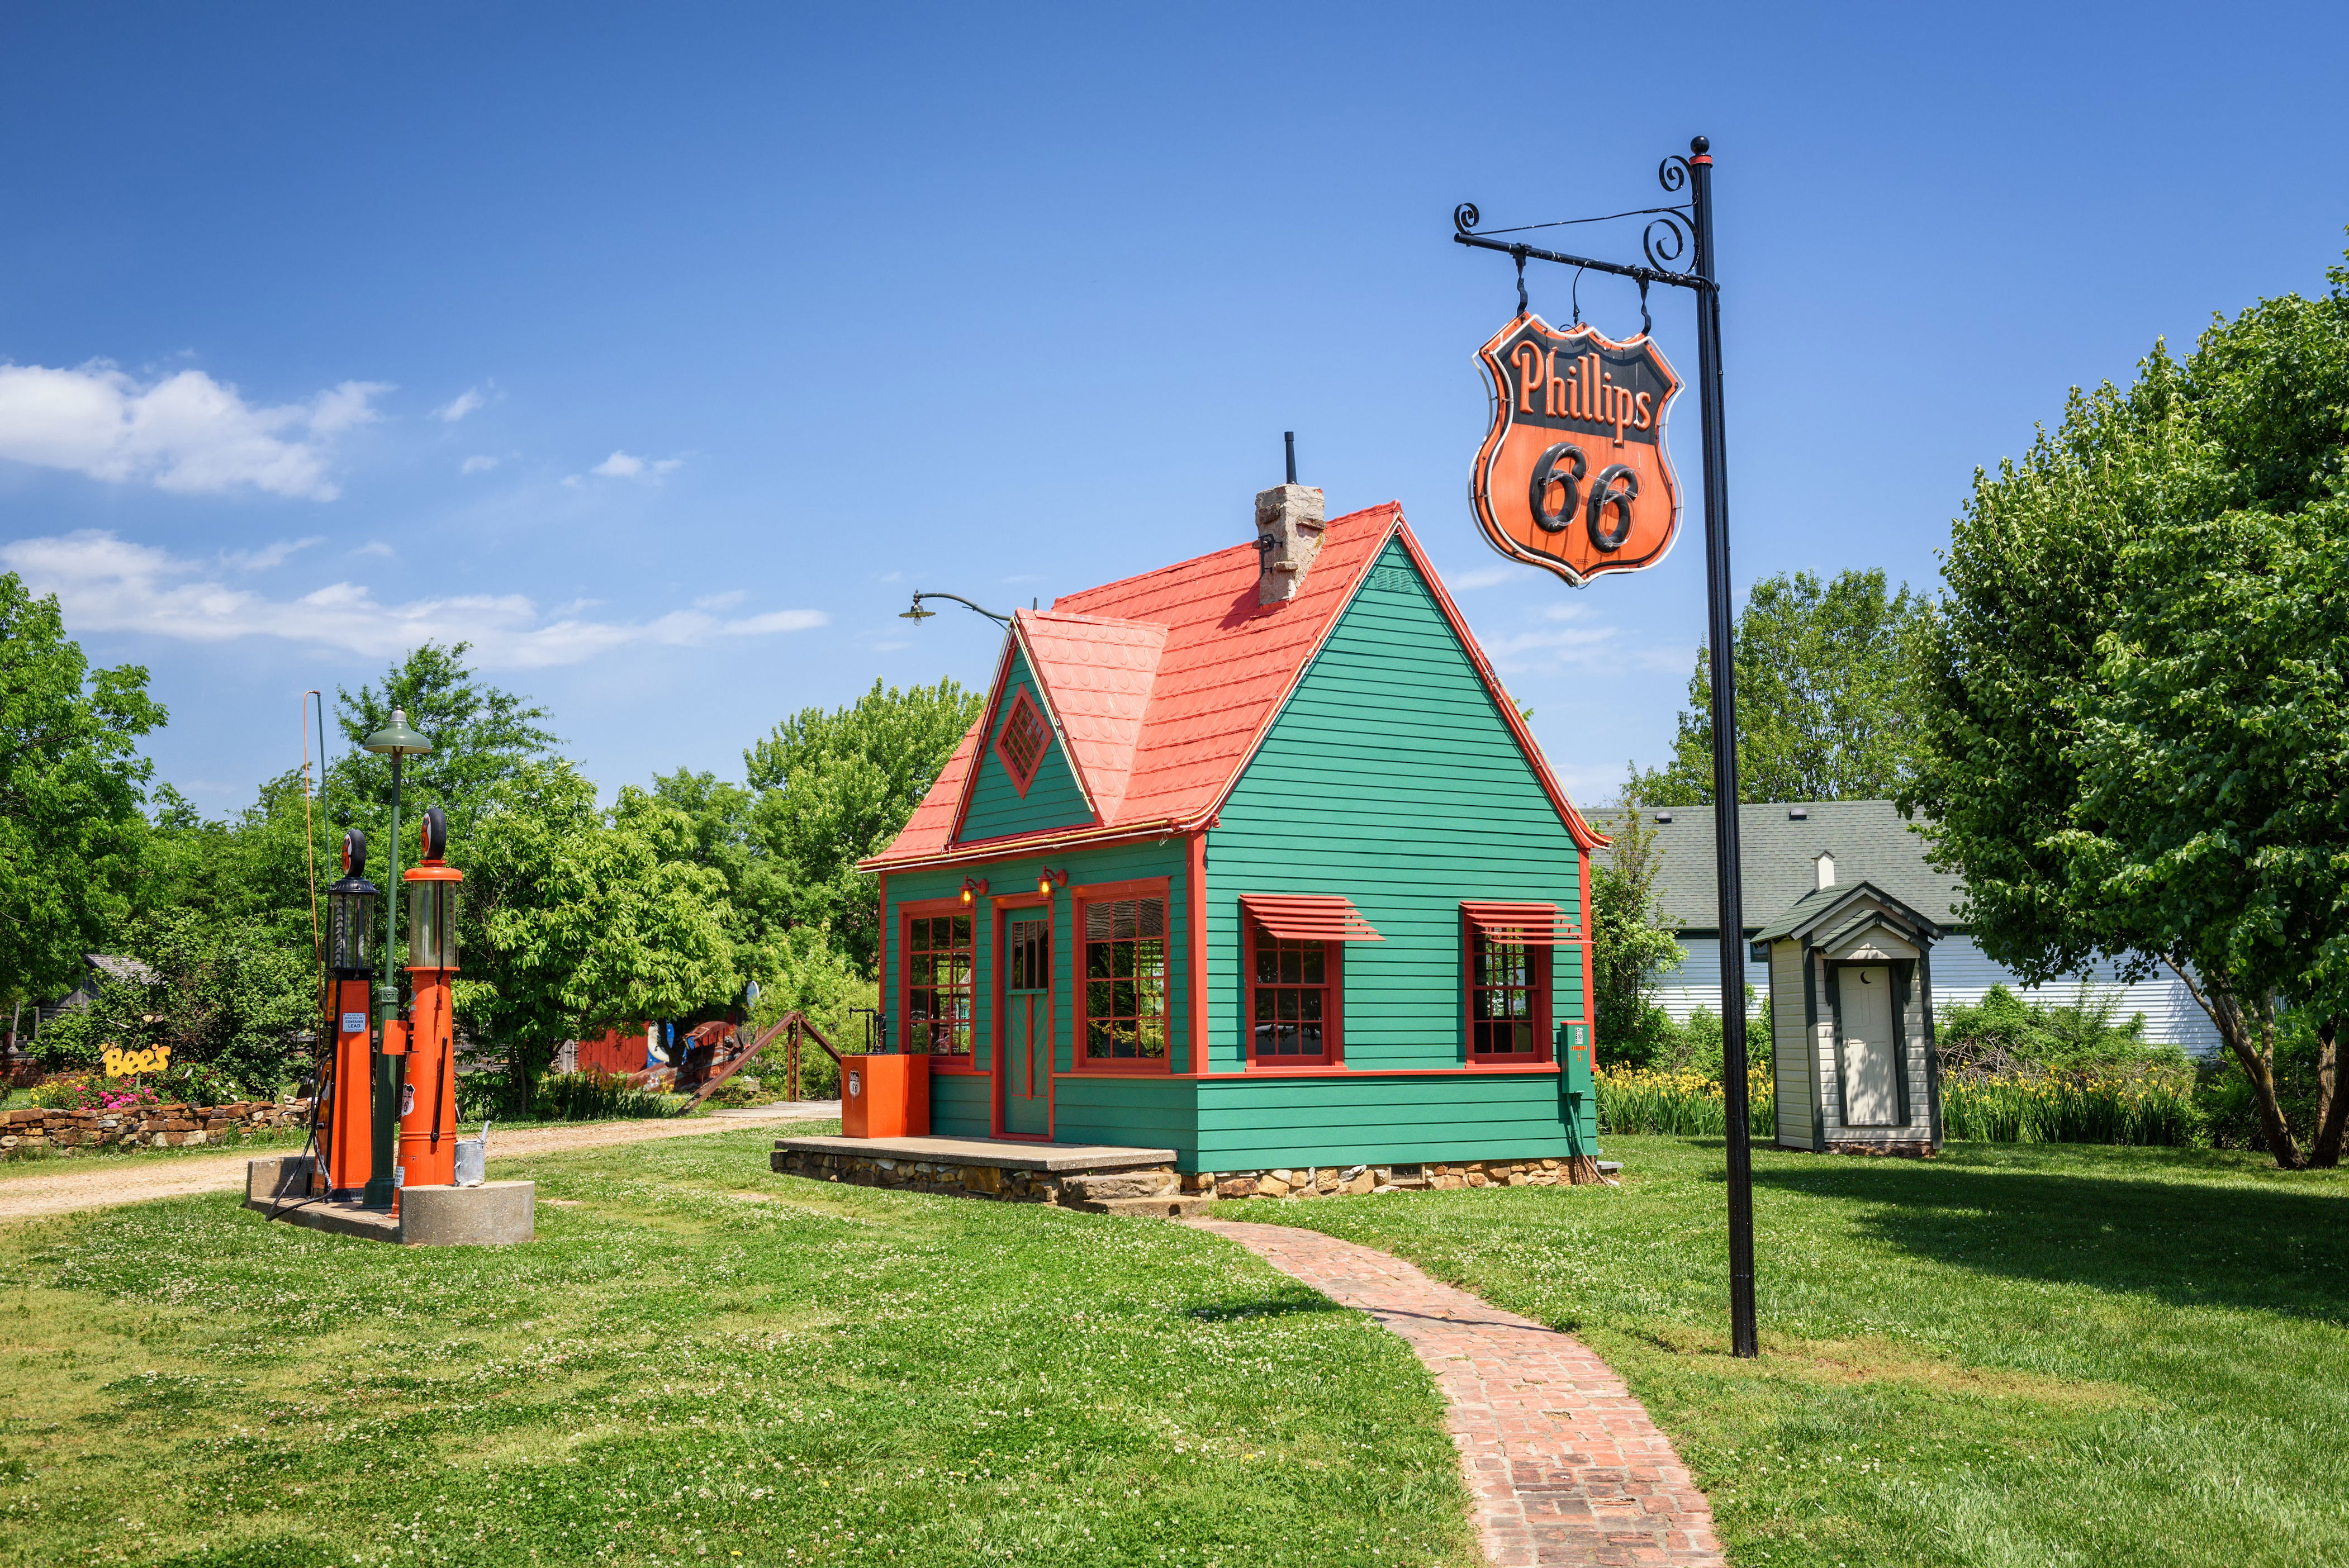 <p>The 2,200-mile long <a href="https://www.cntraveler.com/story/long-live-route-66?mbid=synd_msn_rss&utm_source=msn&utm_medium=syndication">Route 66</a> has been immortalized in countless rock songs, stories, and poems by everyone from Nat King Cole and Chuck Berry to John Steinbeck. Though it technically runs from Chicago to California, the best stretch is a two-day drive from St. Louis to the edge of Texas, via Lake of the Ozarks and Oklahoma City. There’s a sense of nostalgia (mingling with a little loneliness) and curios stops abound.</p> <p><strong>Where to stop:</strong> For natural wonders there’s nowhere better than the 4.6-mile long cave system called the <a href="https://www.americascave.com/">Meramec Caverns</a> in Stanton—a series of vast underground spaces that were used by Native Americans for shelter, and, reportedly, as a hideout by outlaw Jesse James. A sweet picnic idea: head to Lake of the Ozarks State Park.</p> <p><strong>Where to eat:</strong> When driving Route 66, roadside diners, for a classic American meal, are a must. The Rock Café in Stroud, Oklahoma, and Waylan's Ku-Ku Burger in Miami, are both iconic– renowned for their delicious burgers and of course, retro charm. If you’re into this kind of thing, head to anywhere that serves ribs, St. Louis-style. The midwestern city’s southern inflection is evident in the pride locals take in its ribs, grilled and sauced, rather than dry-rubbed and slow-smoked.</p> <p><strong>Where to stay:</strong> Overnight at the Oklahoma City outpost of the <a href="https://www.21cmuseumhotels.com/oklahomacity/">21C Museum Hotel</a> boutique chain, a four-year-old downtown property in the former Ford Motor Company assembly plant. There’s also the art-deco inspired Ambassador Hotel in OKC’s vibrant downtown district.</p><p>Sign up to receive the latest news, expert tips, and inspiration on all things travel</p><a href="https://www.cntraveler.com/newsletter/the-daily?sourceCode=msnsend">Inspire Me</a>